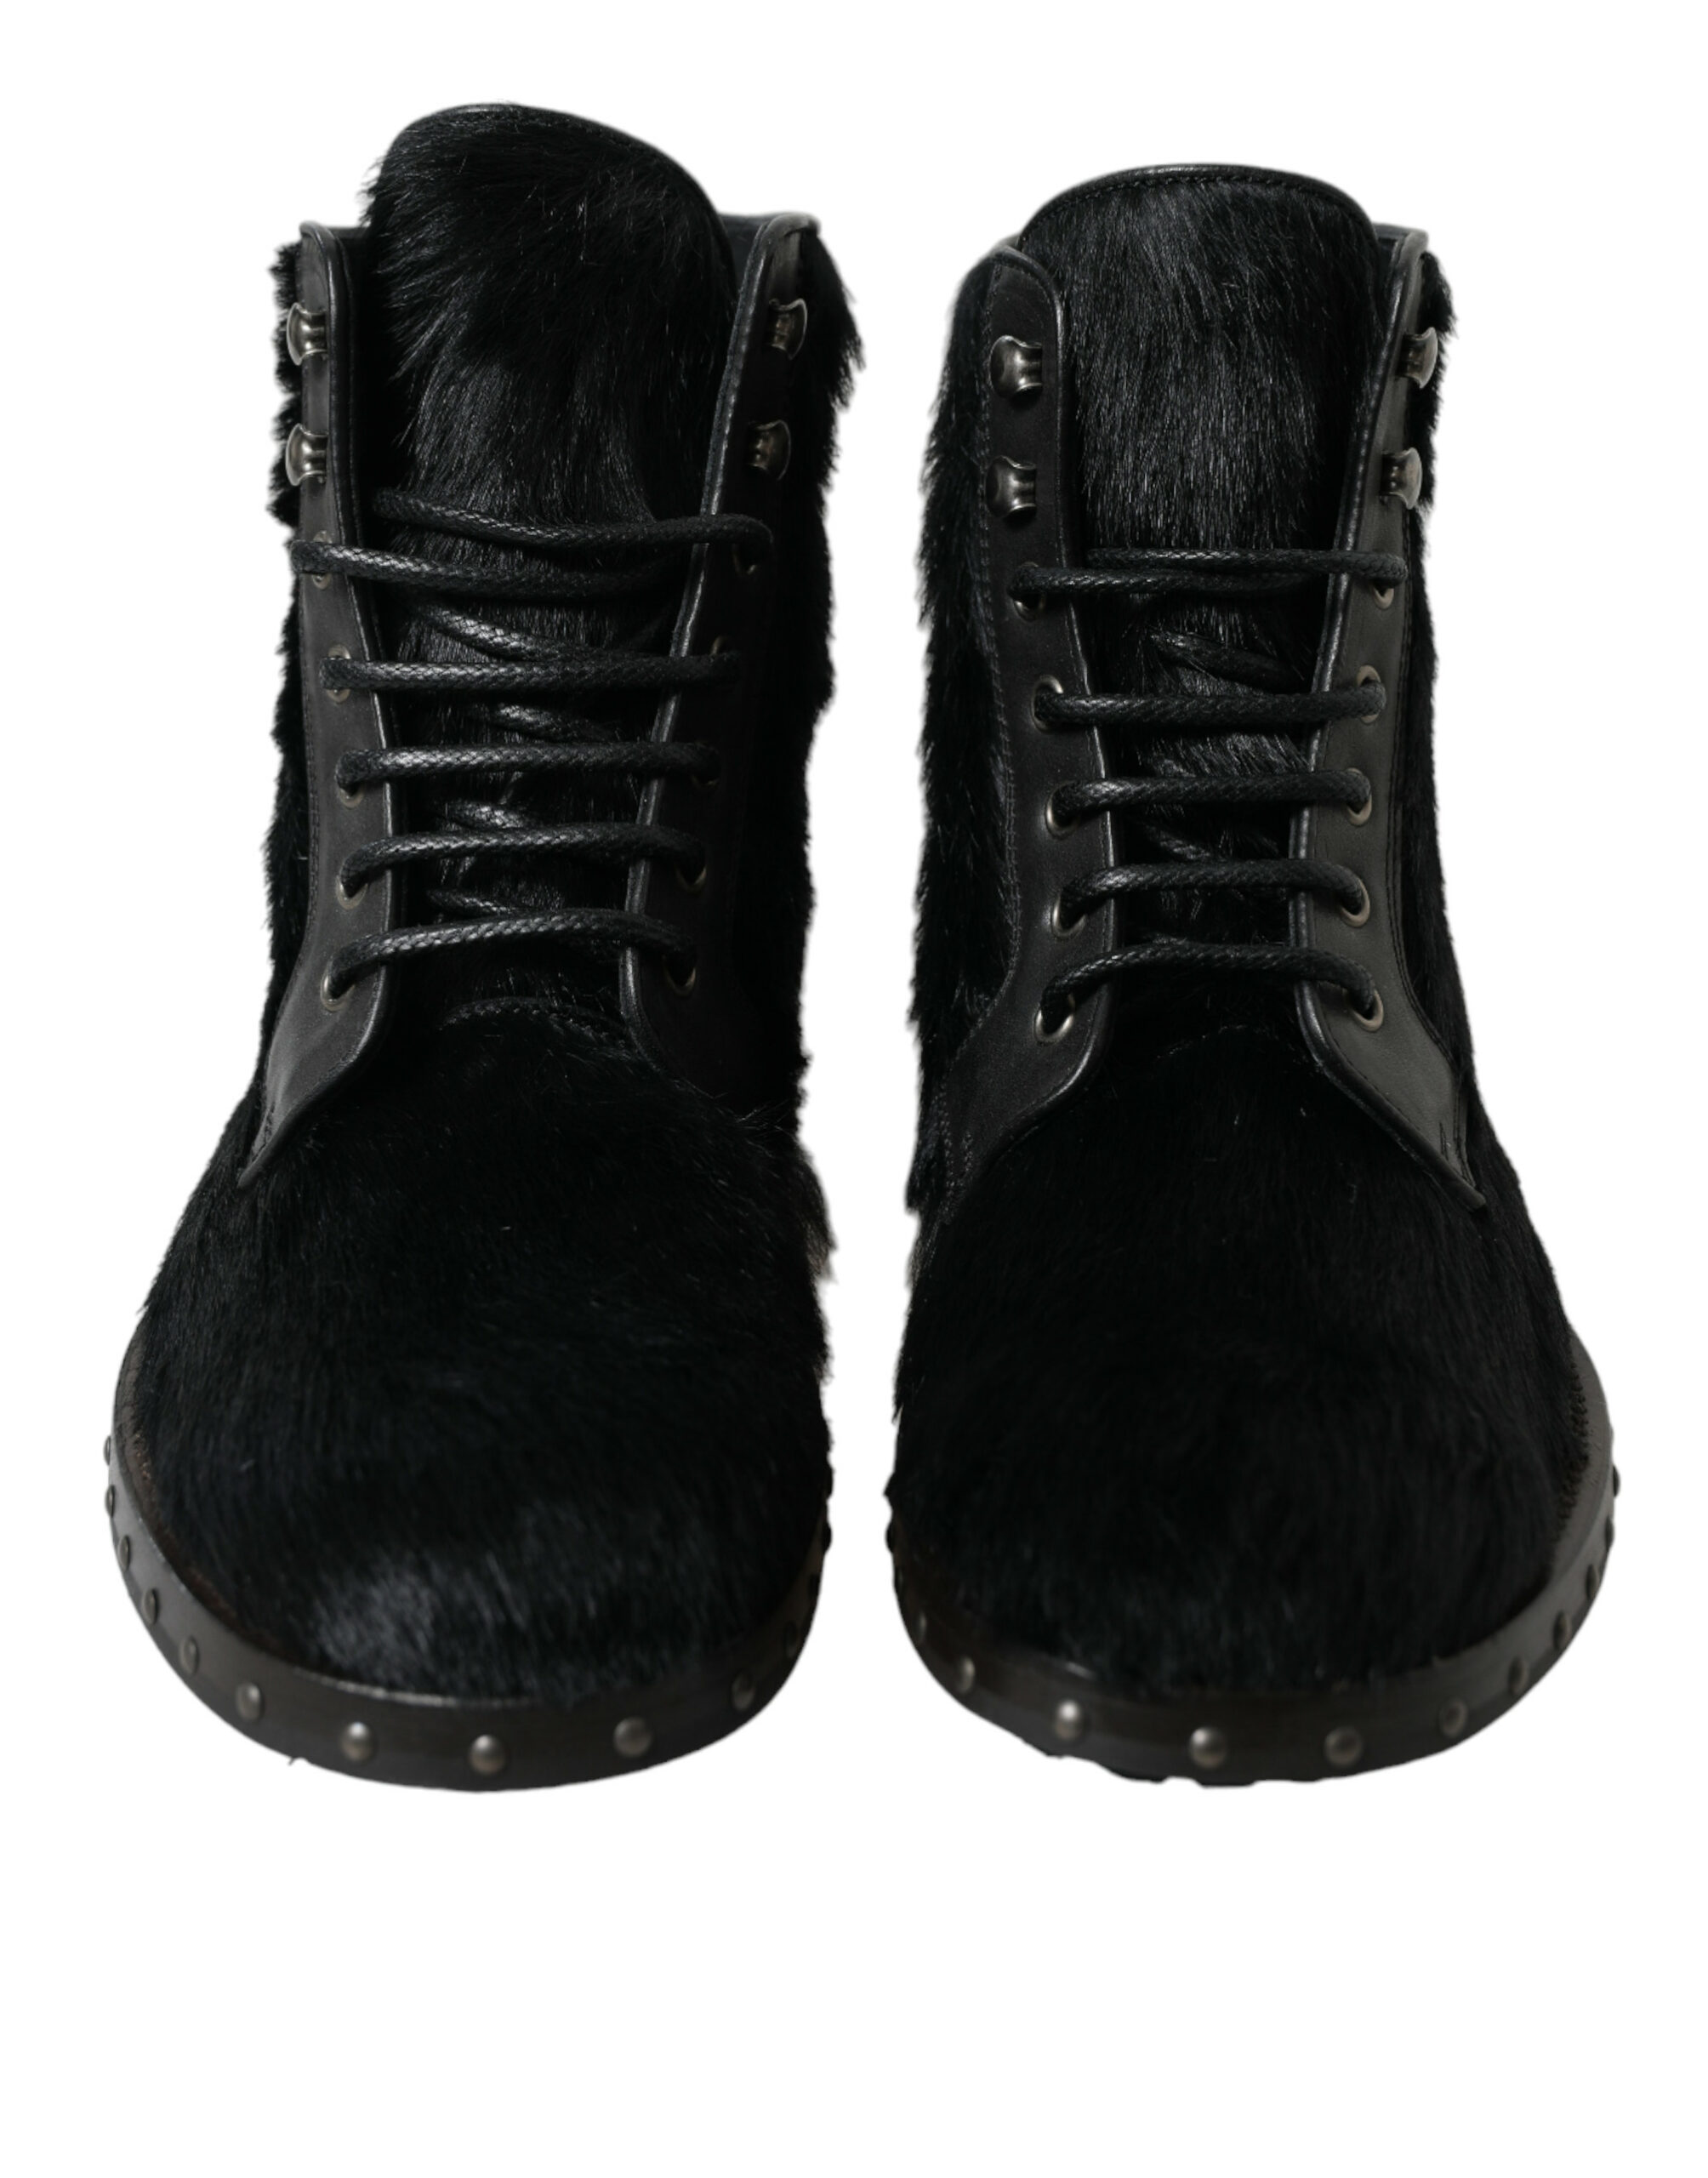 Leather Mid Calf Lace-up Boots with Rubber Sole